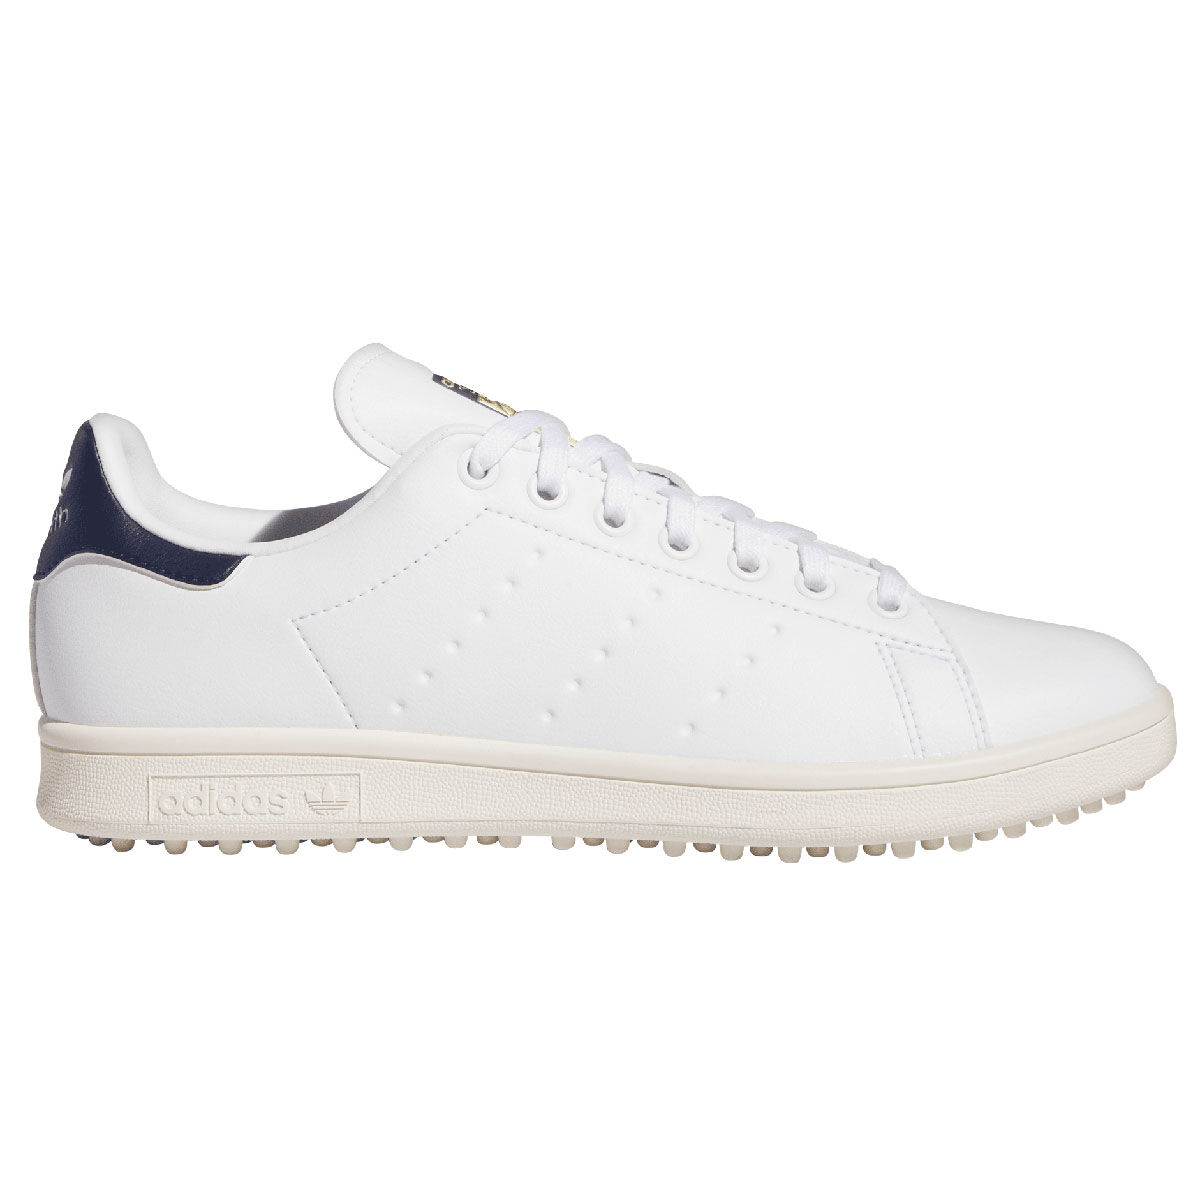 adidas Men’s Stan Smith Waterproof Spikeless Golf Shoes, Mens, White/wonder blue/off white, 7 | American Golf